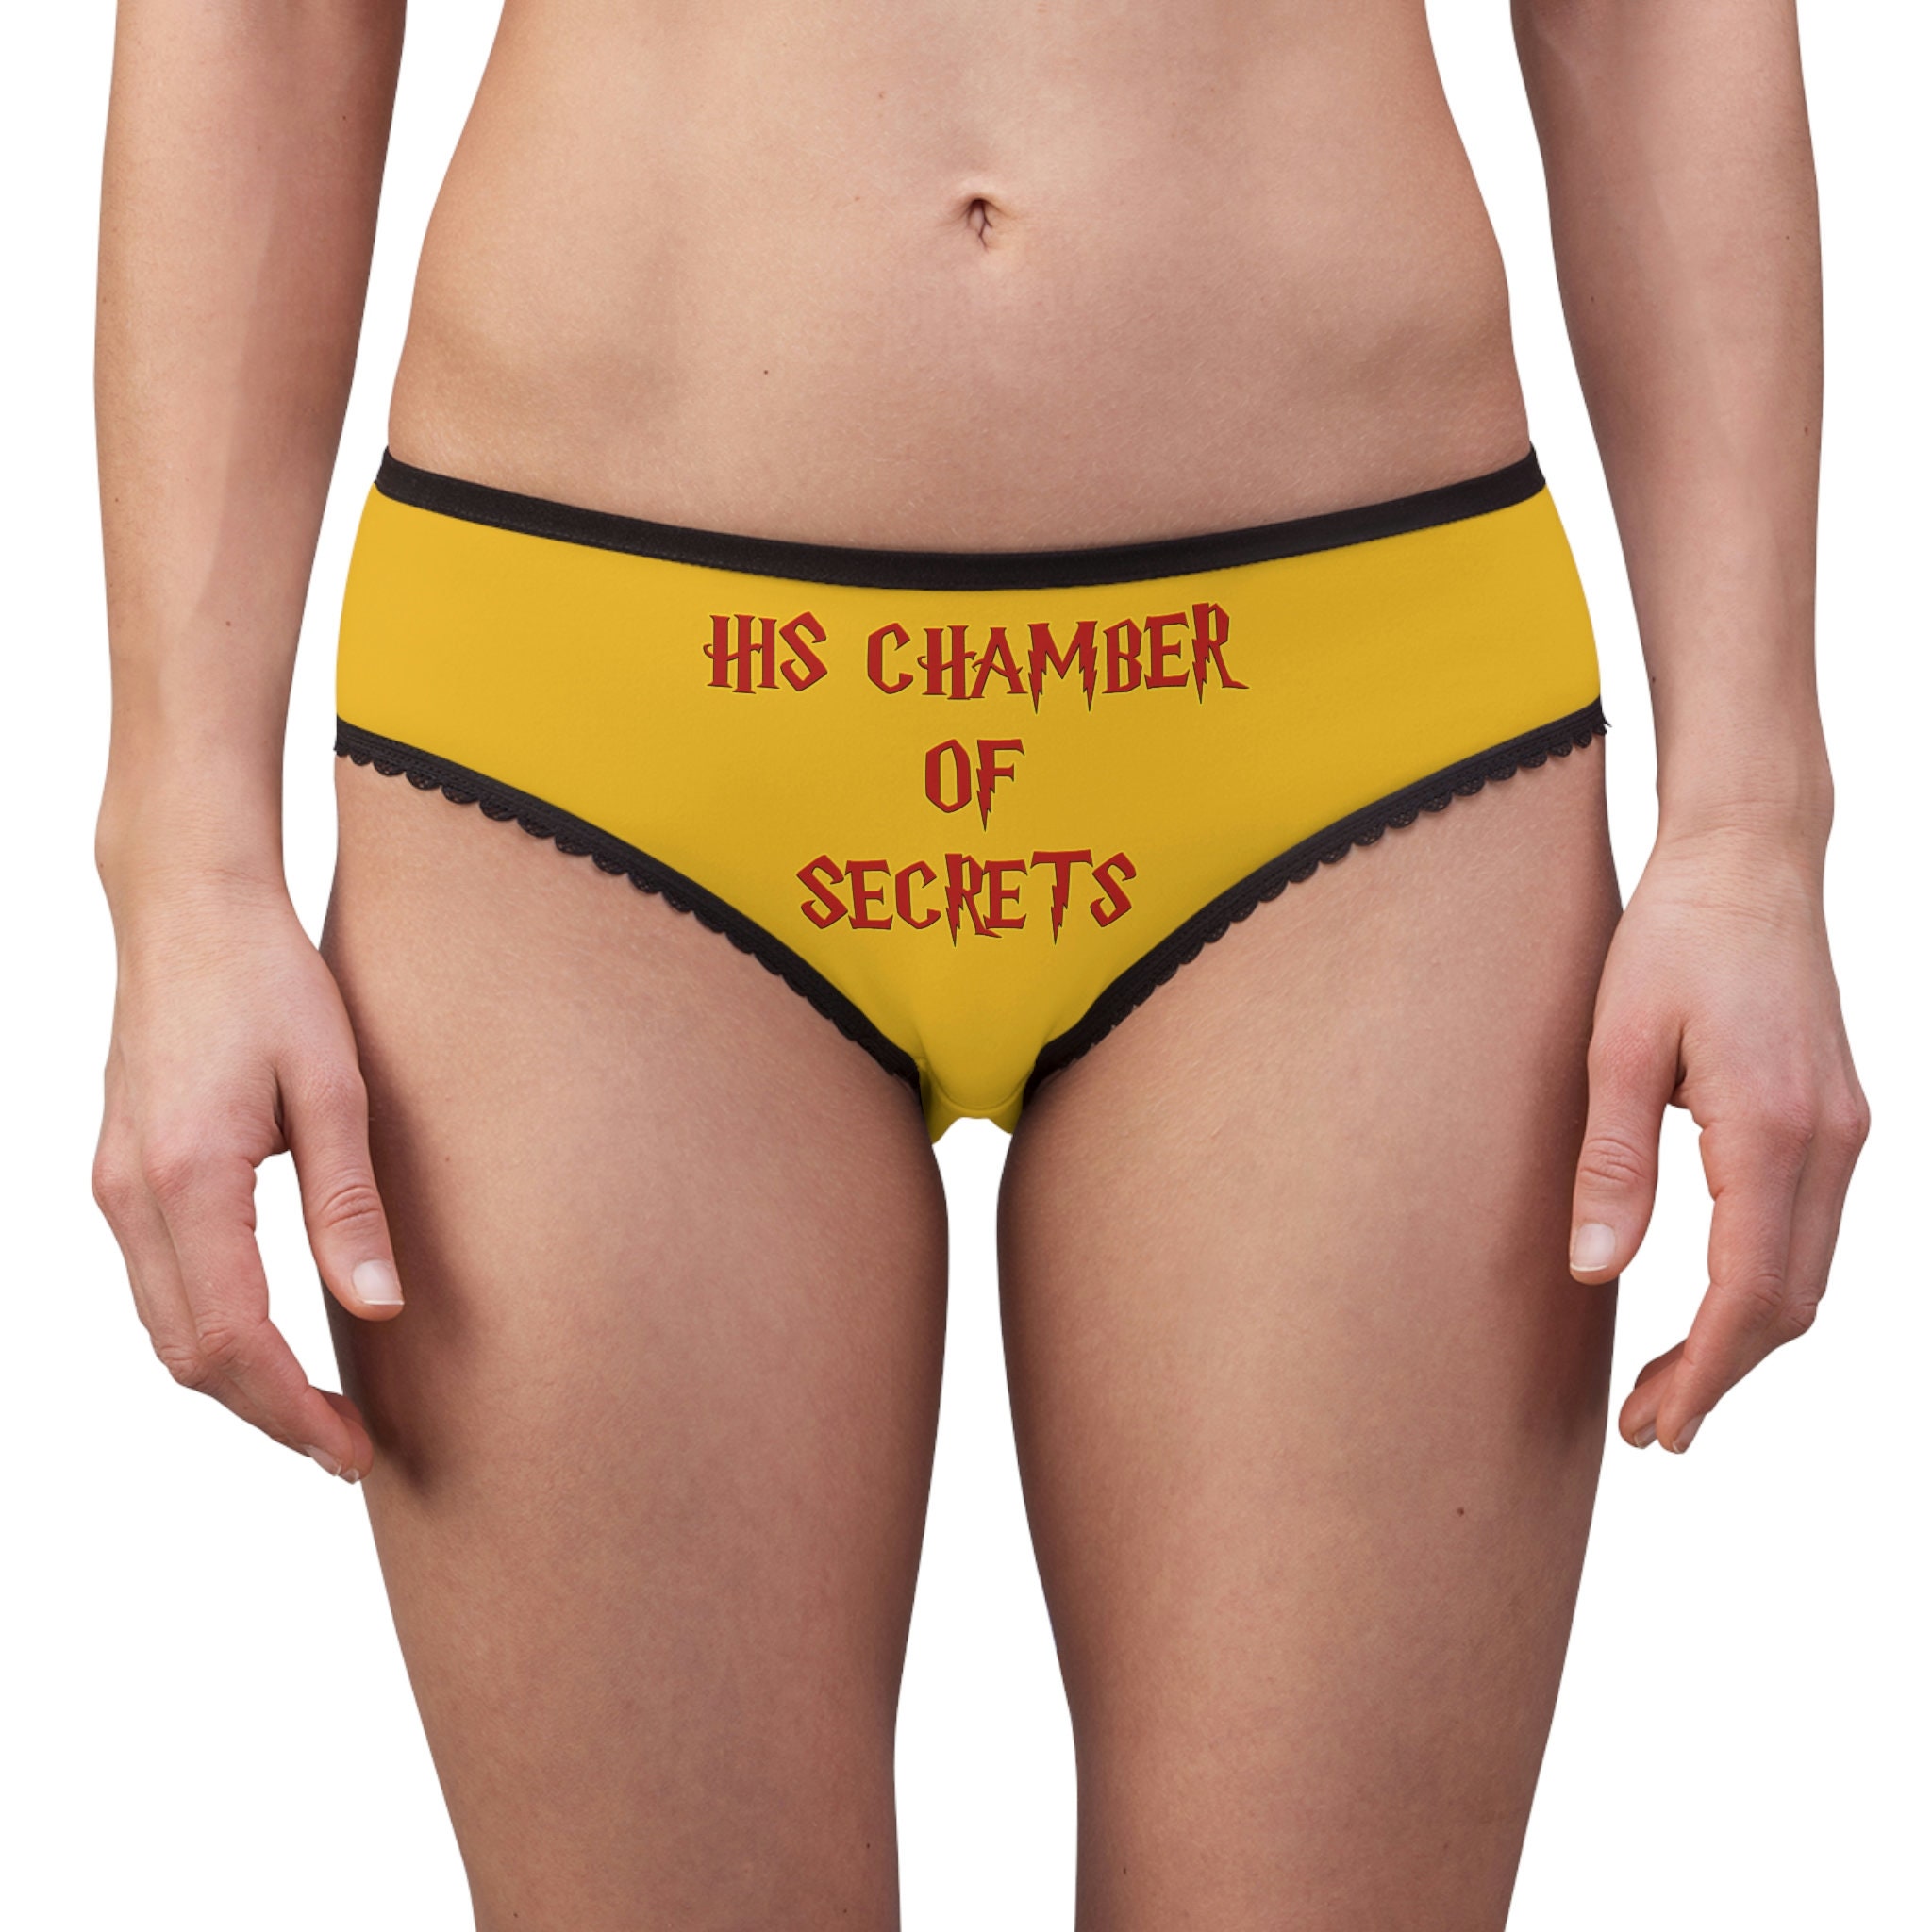 NEW: You can now buy Harry Potter-inspired lingerie